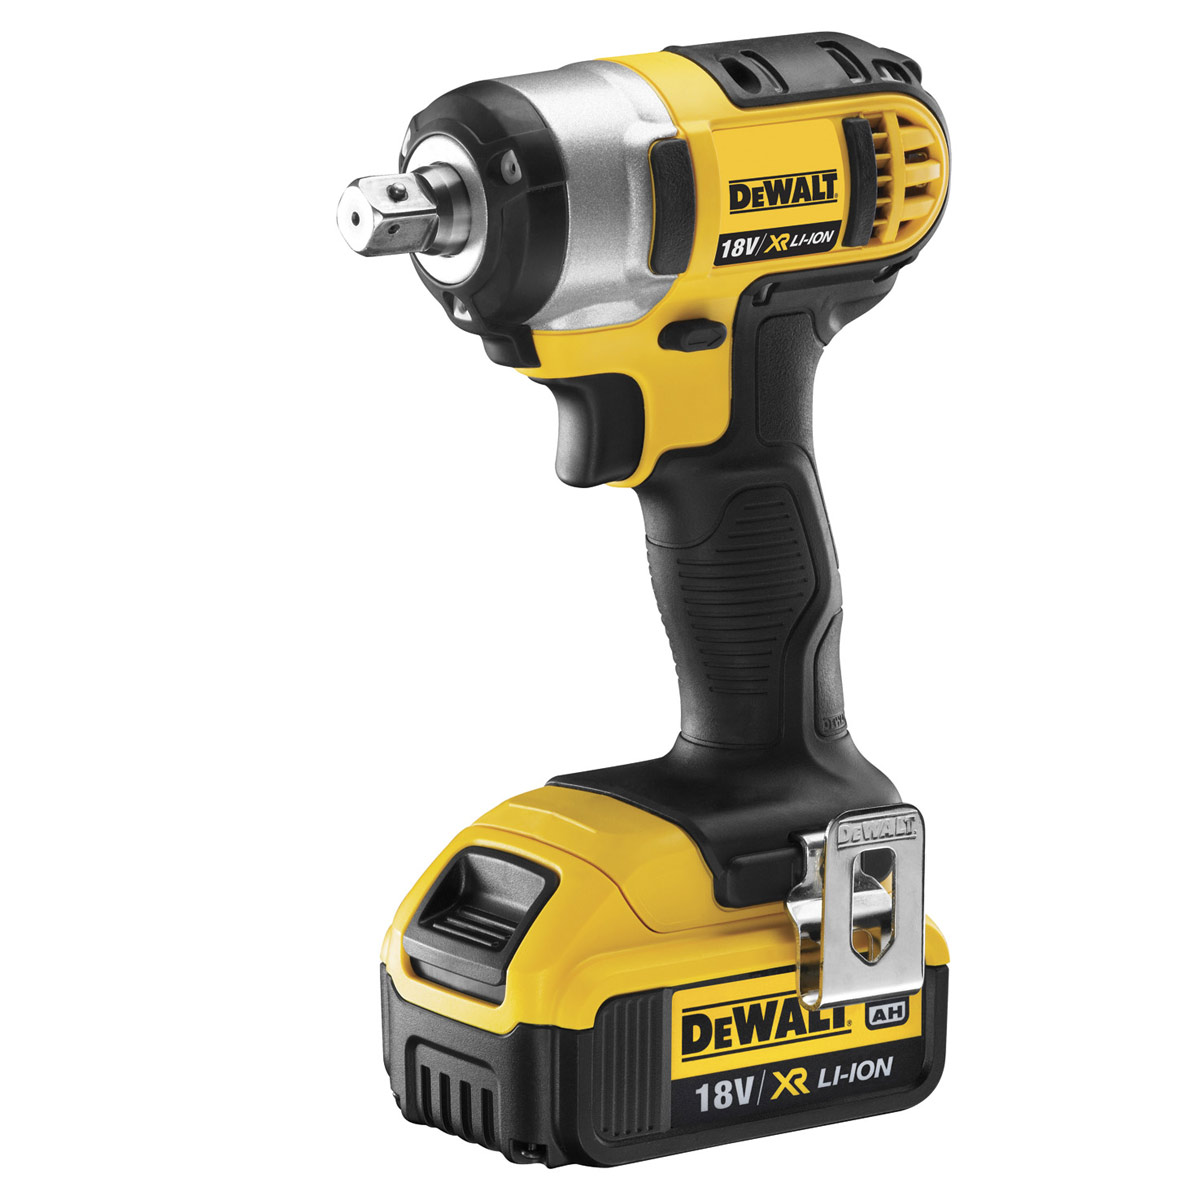 DeWalt Impact Wrench Spares and Parts